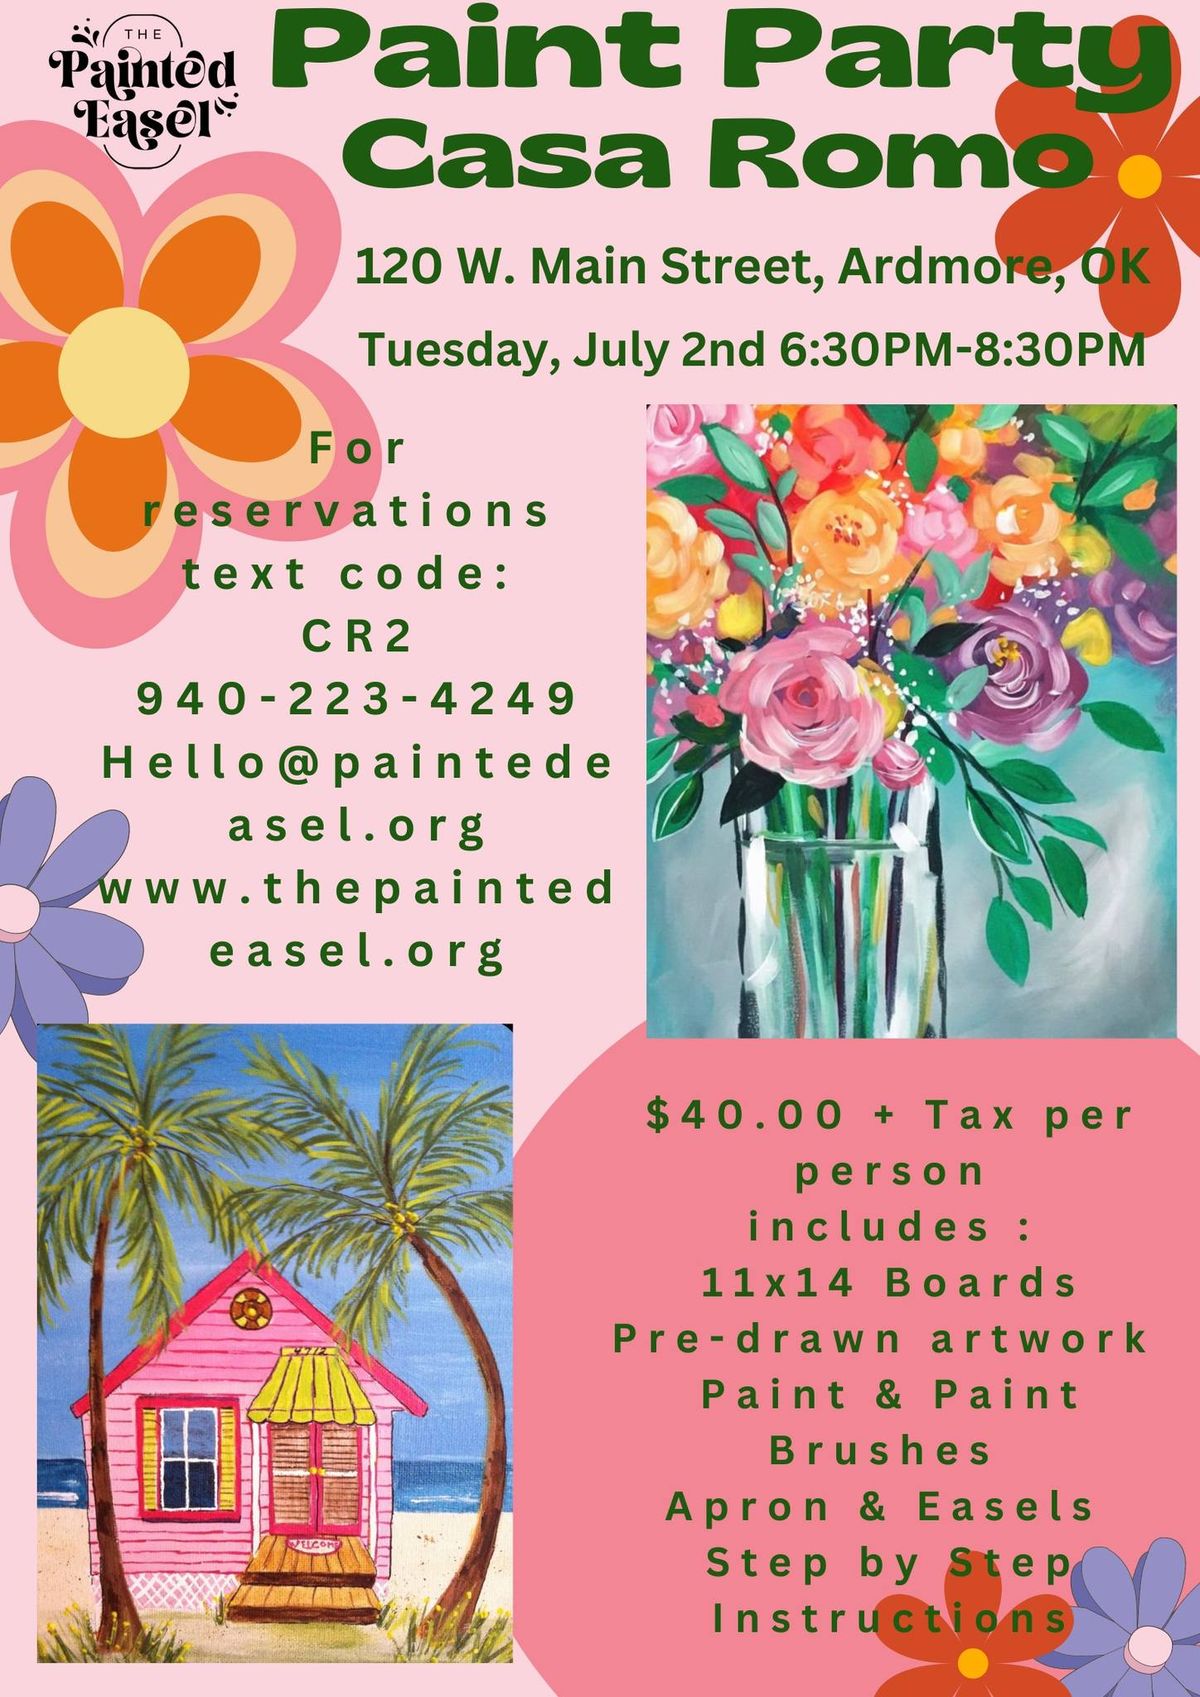 Casa Romo Paint Party - July 2nd 